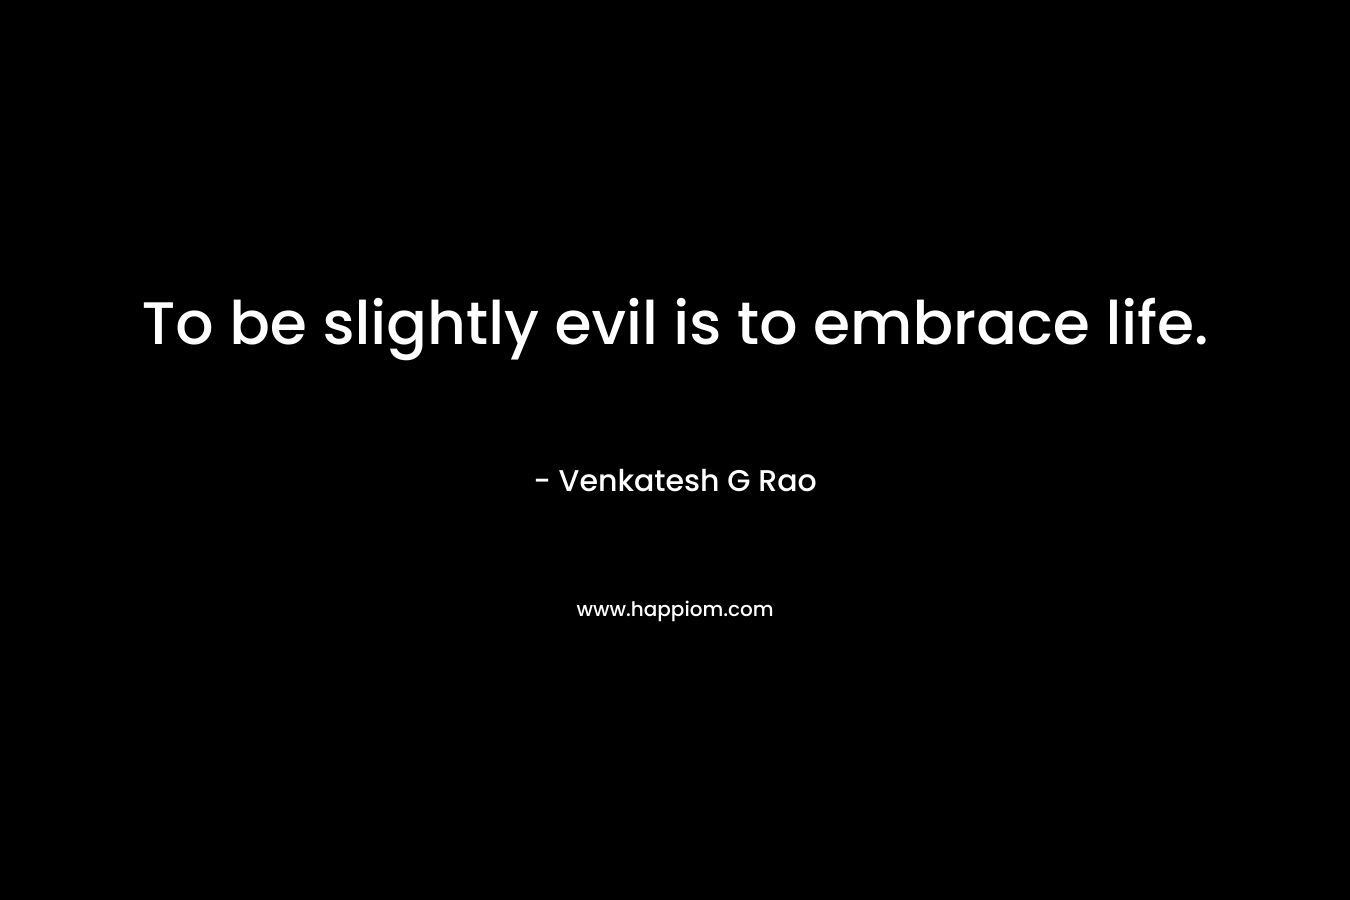 To be slightly evil is to embrace life.